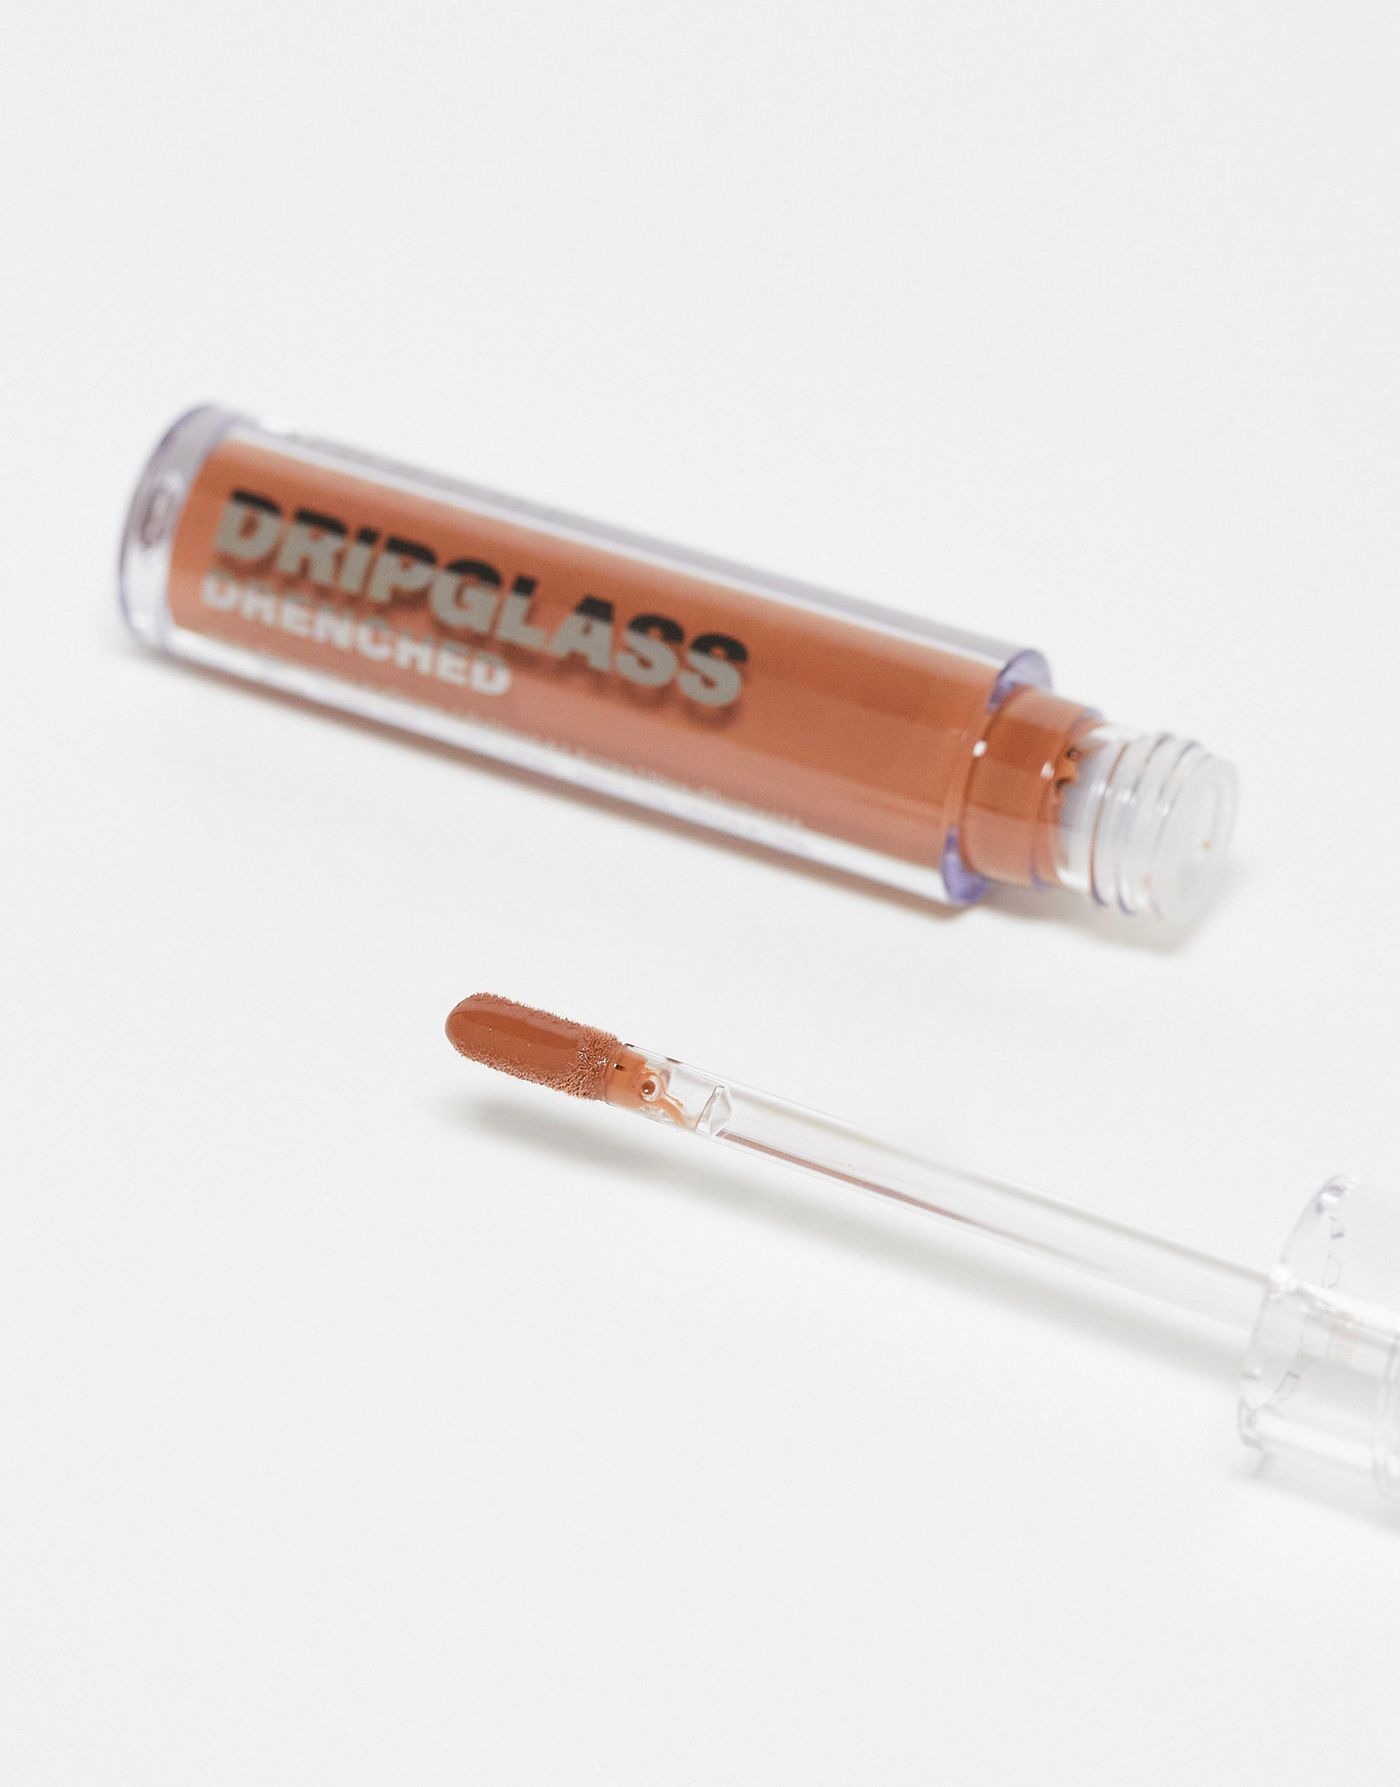 Morphe Dripglass Drenched High Pigment Lip Gloss - Drip Coffee